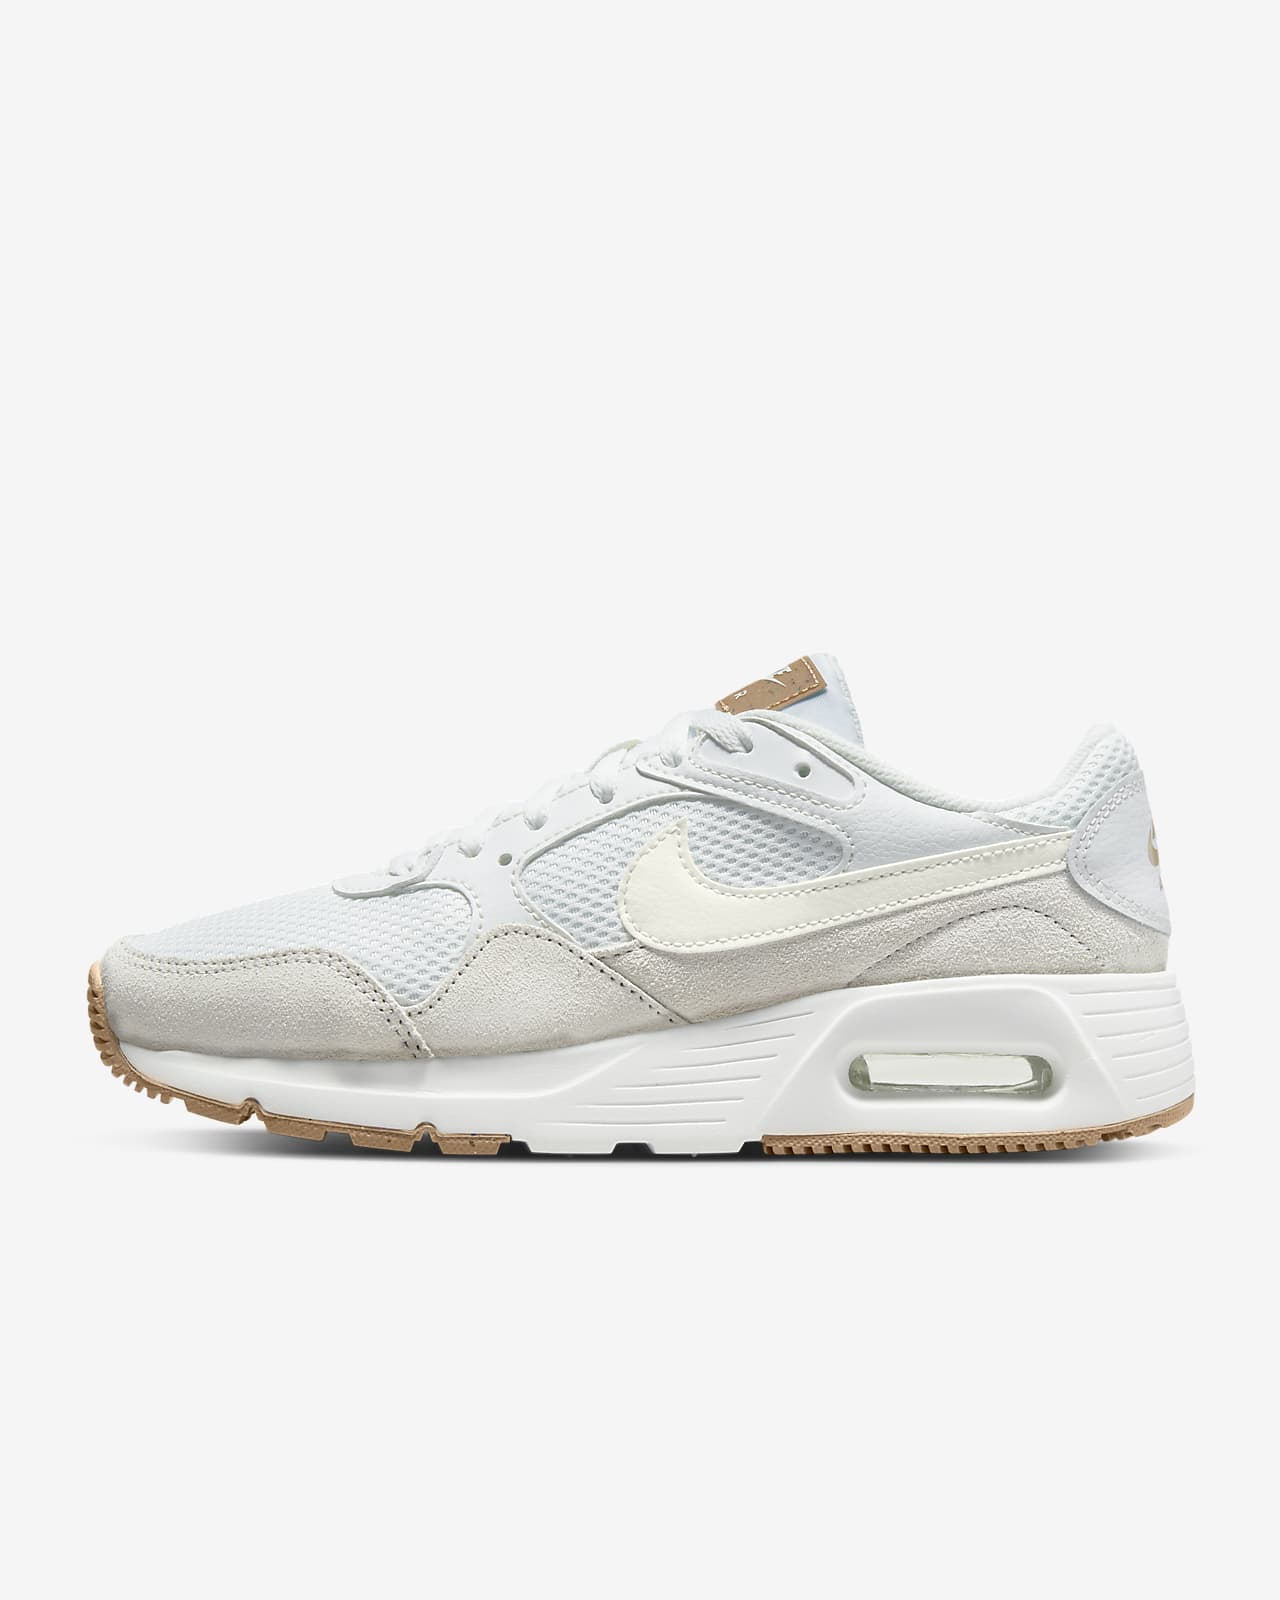 Off White Nike Womens Air Max Sc Sneaker, Athletic & Sneakers